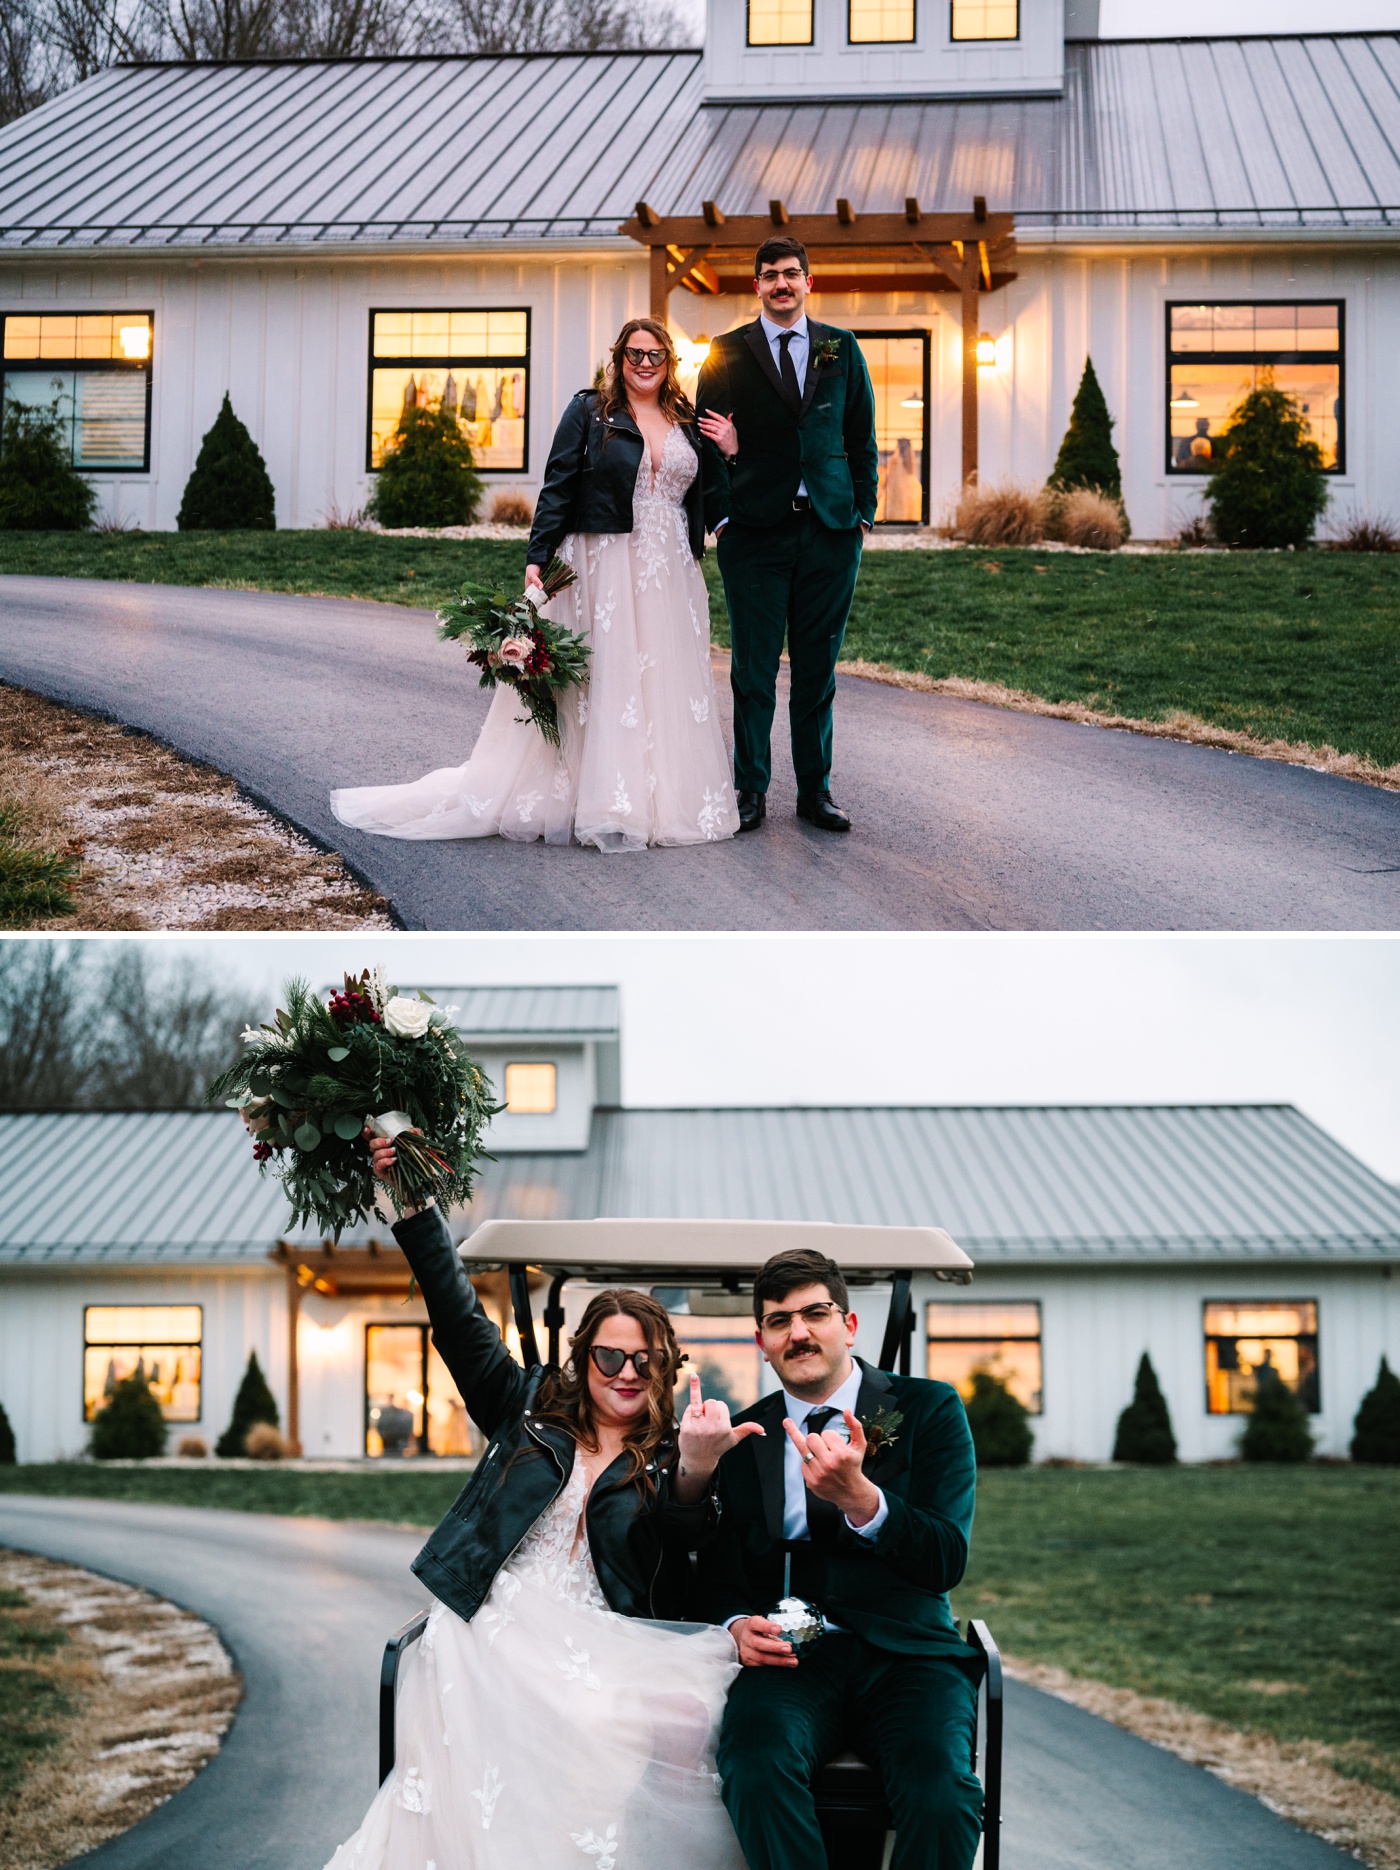 Mika LH - Indiana Wedding and Portrait Photographer